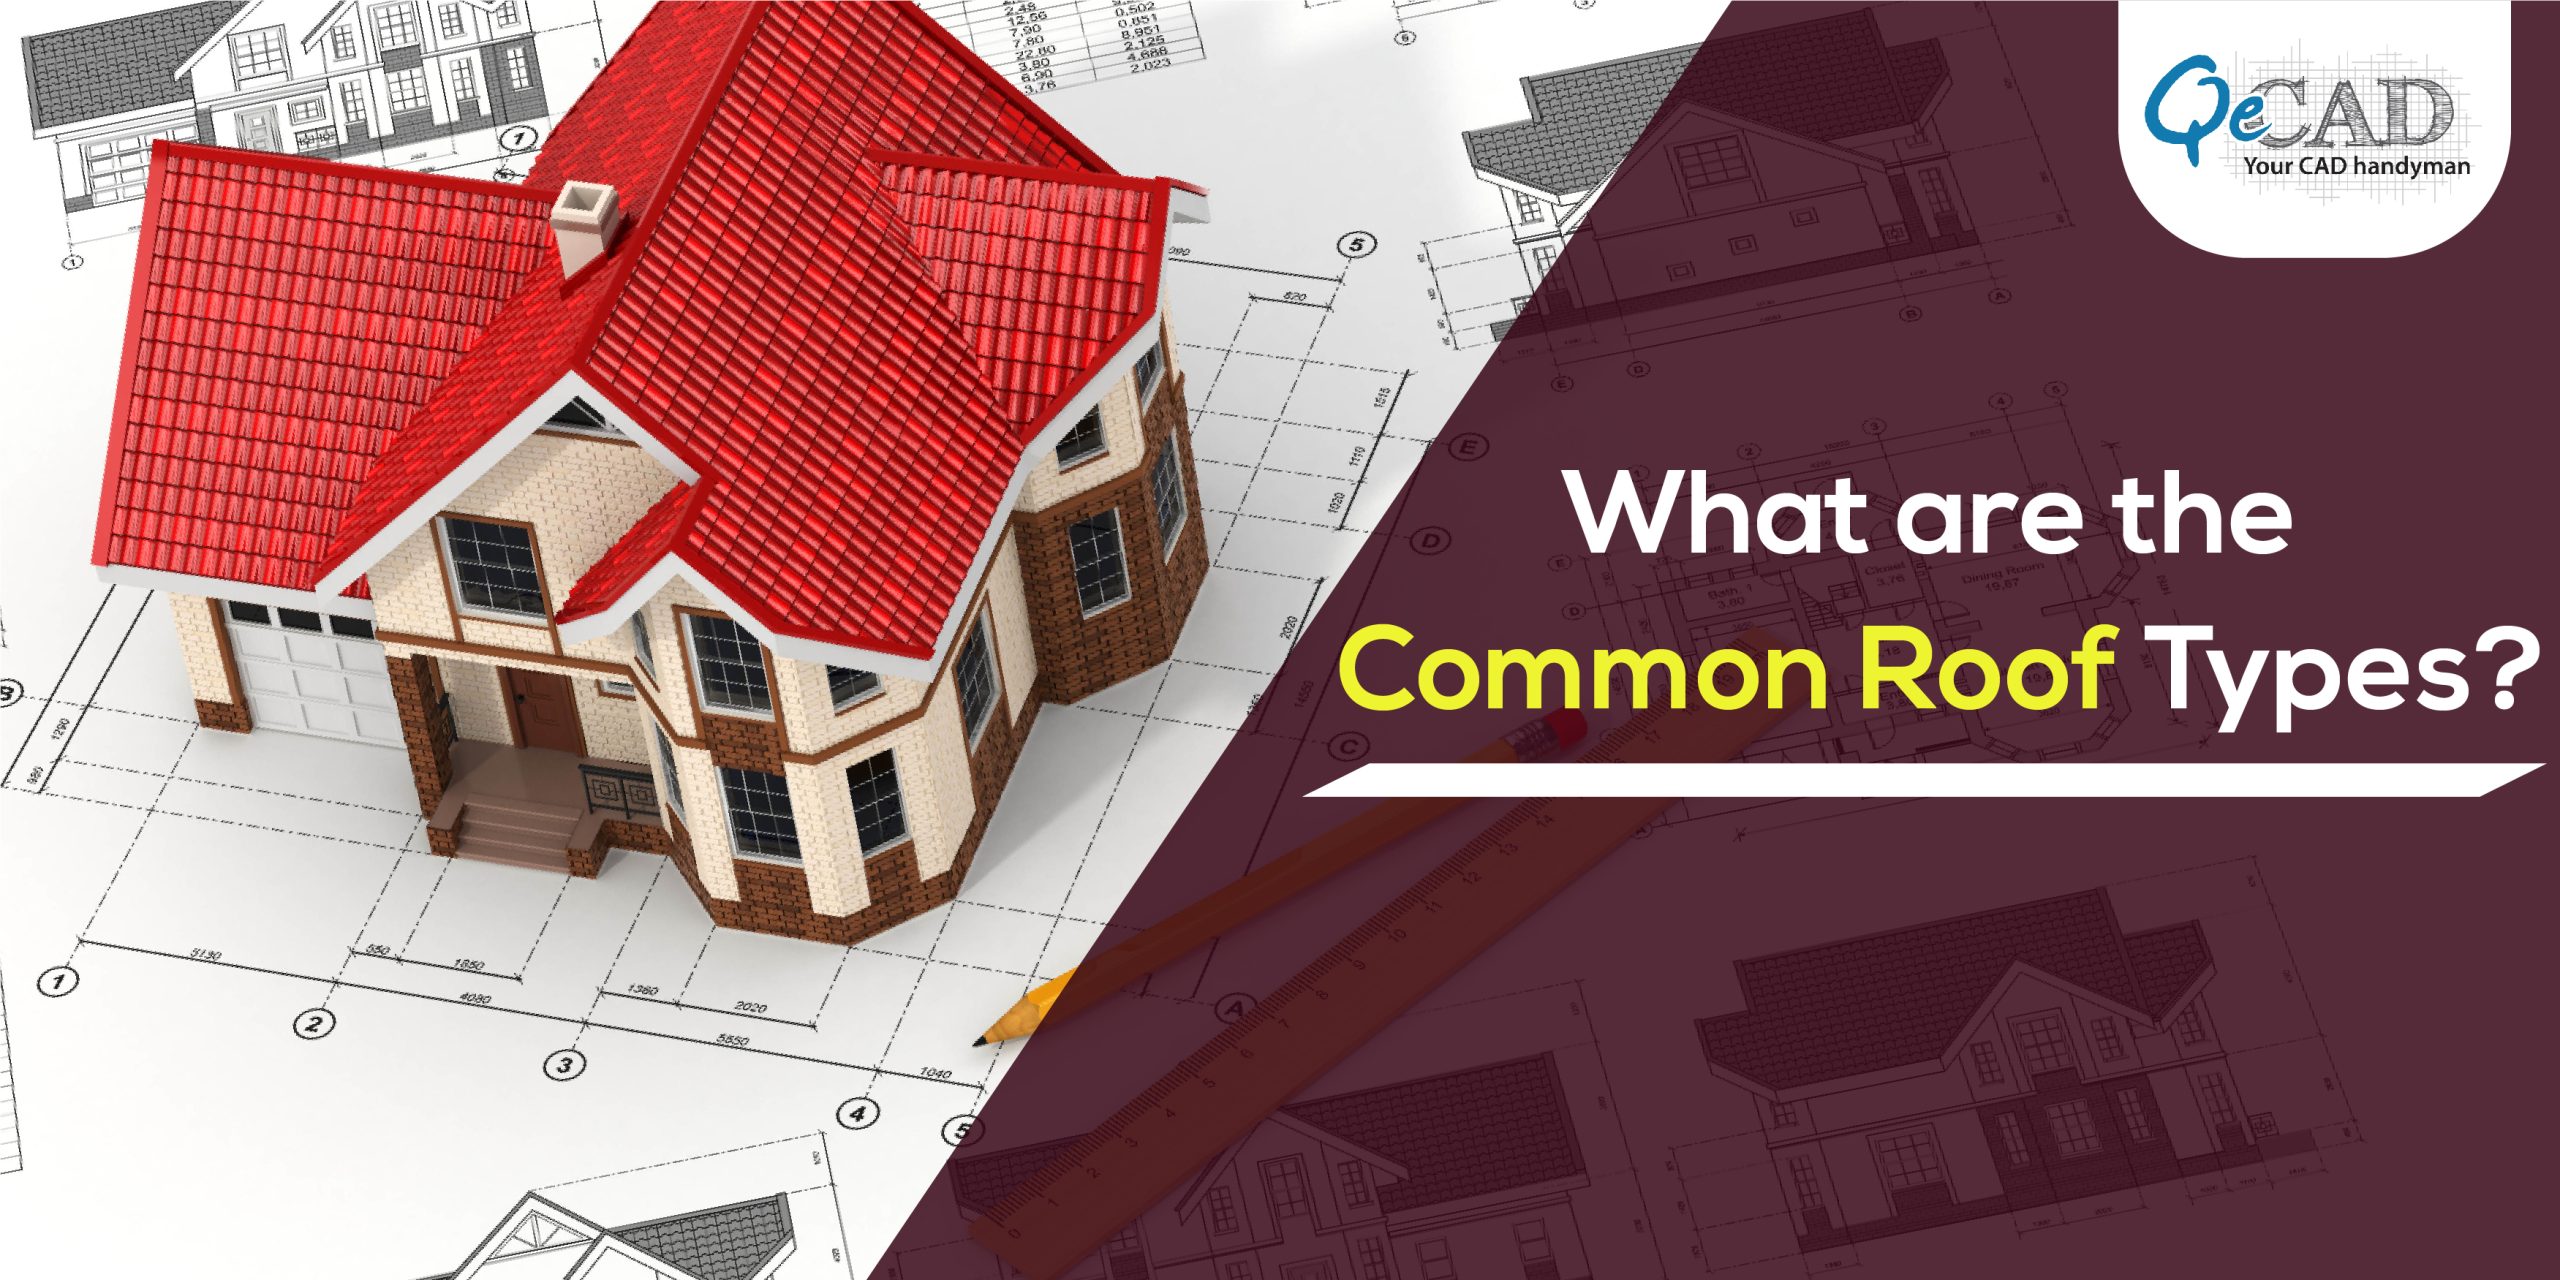 There are many types of roofs, here we have covered most common roofs, Gable roof, Hip Roof, Flat roof, Shed roof, Mansard roof, Saltbox roof, and Butterfly Roof